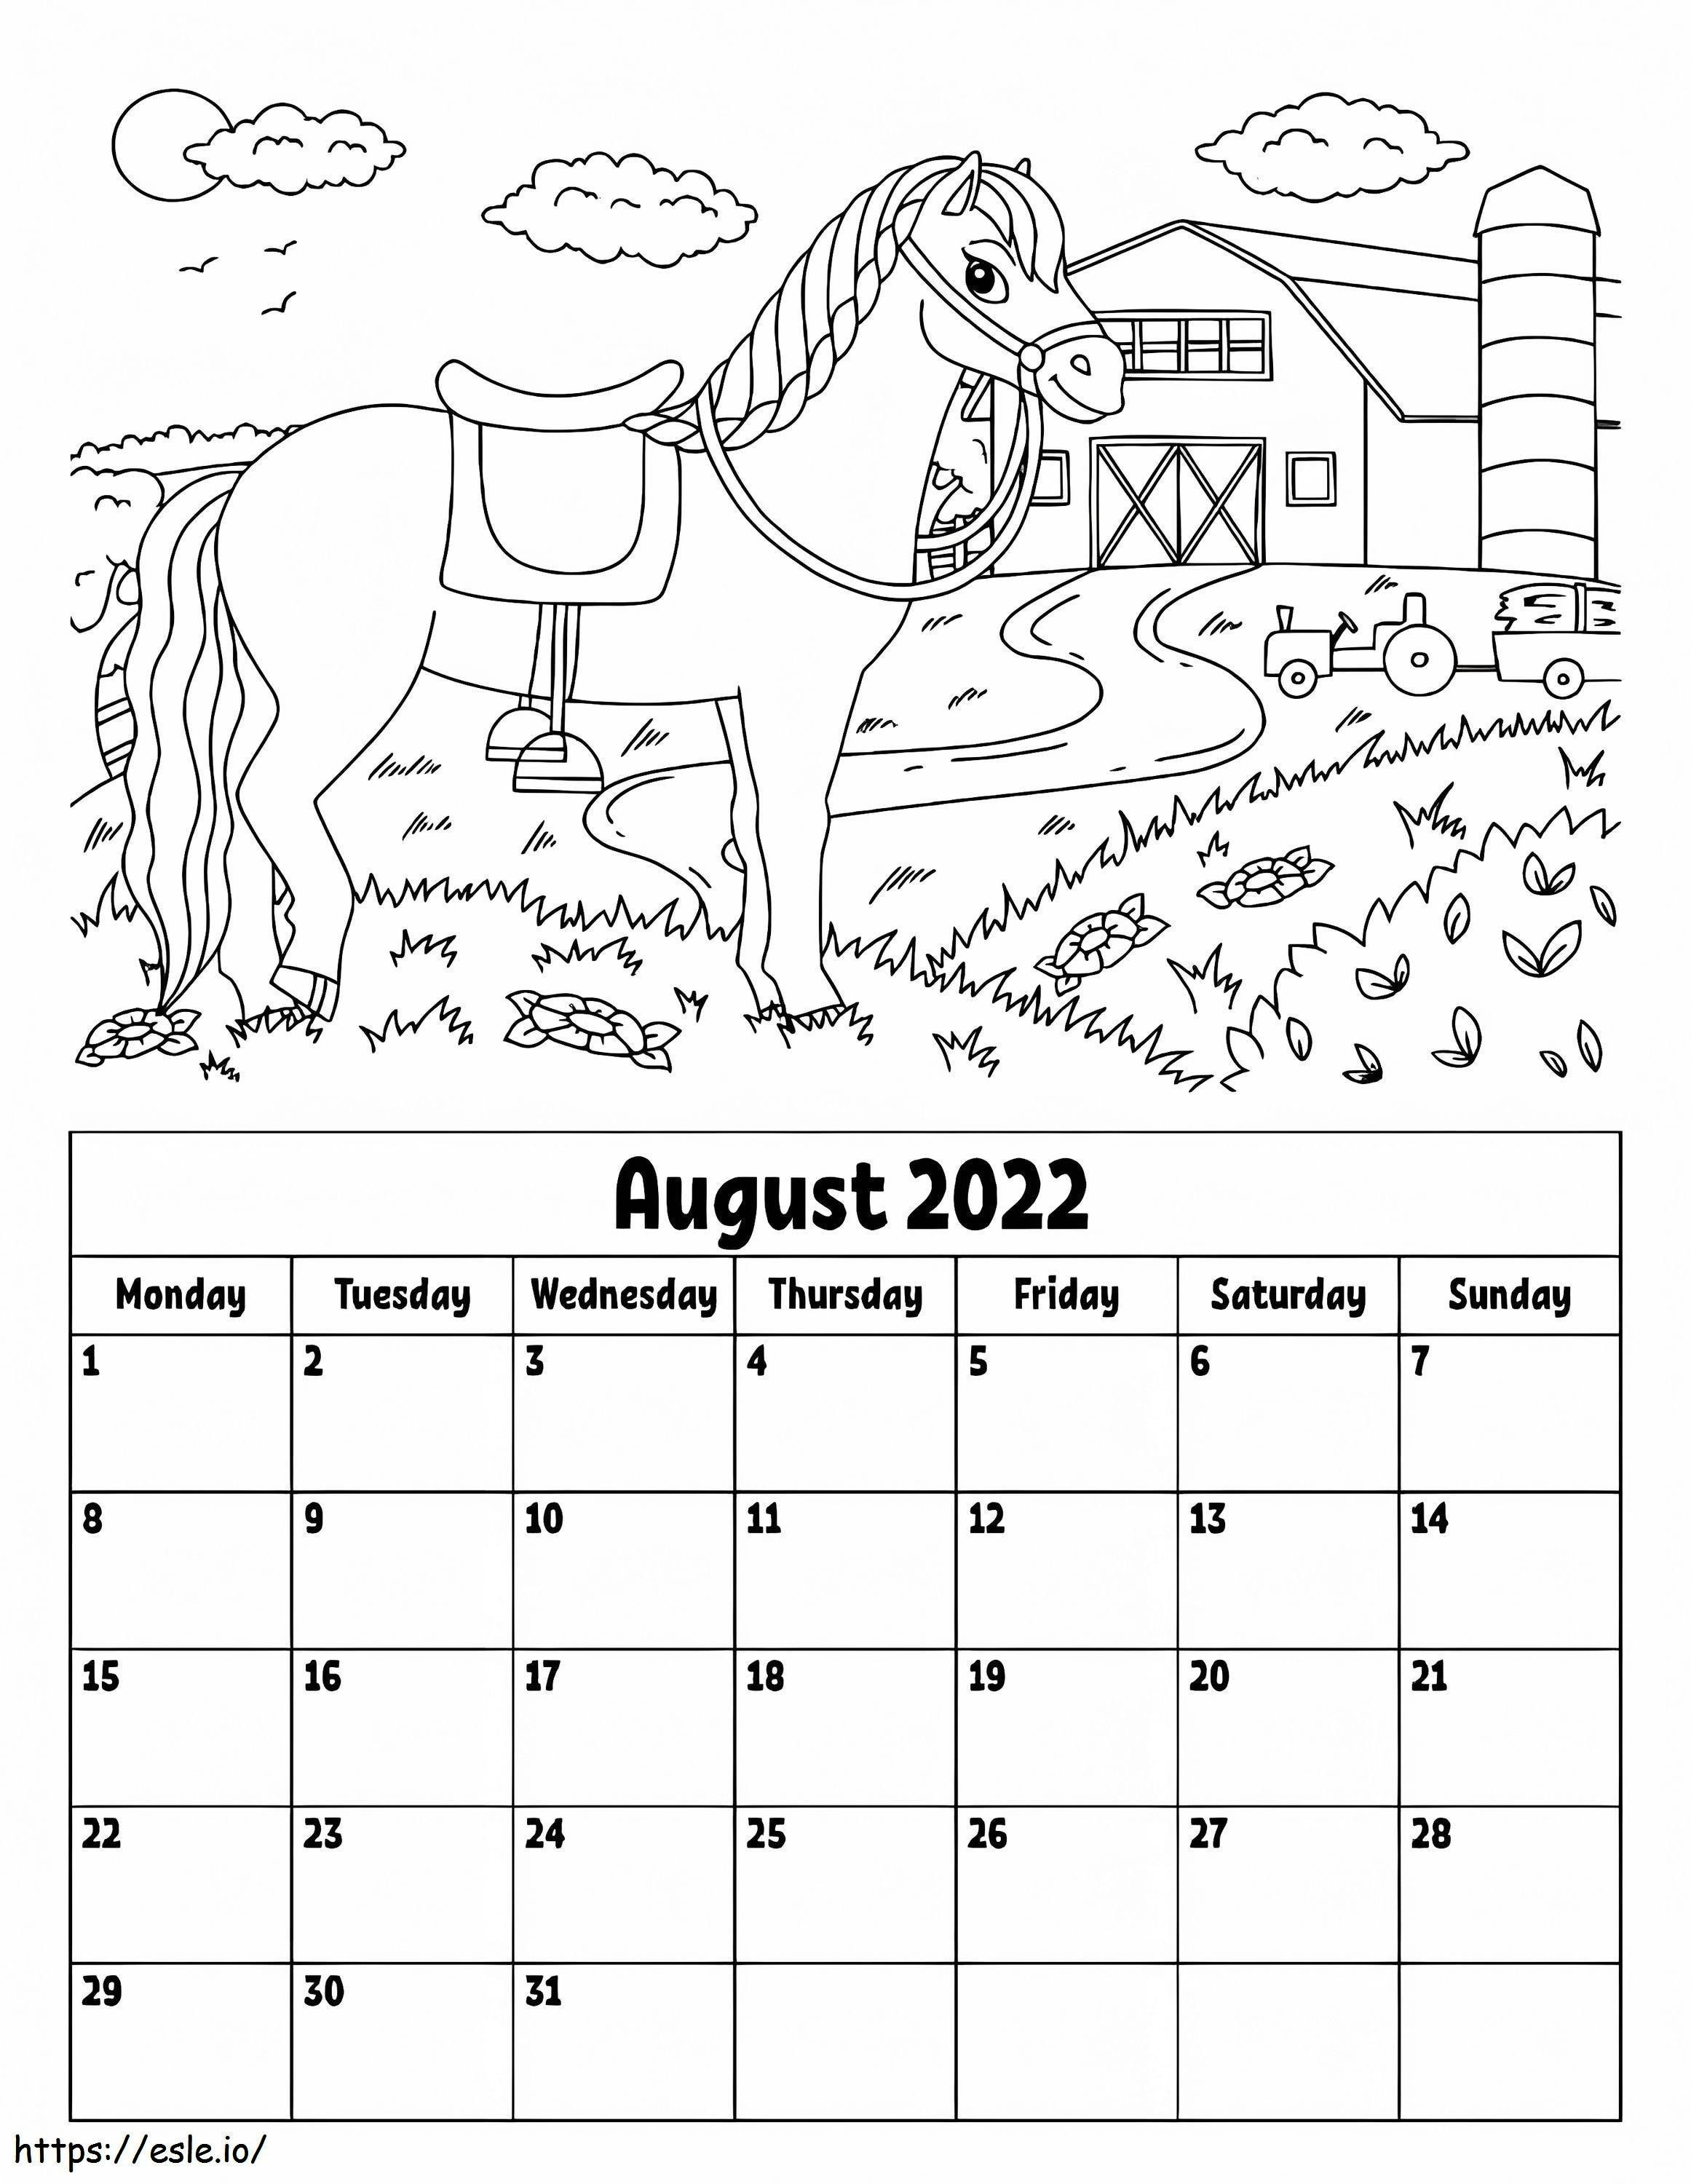 August 2022 Calendar coloring page